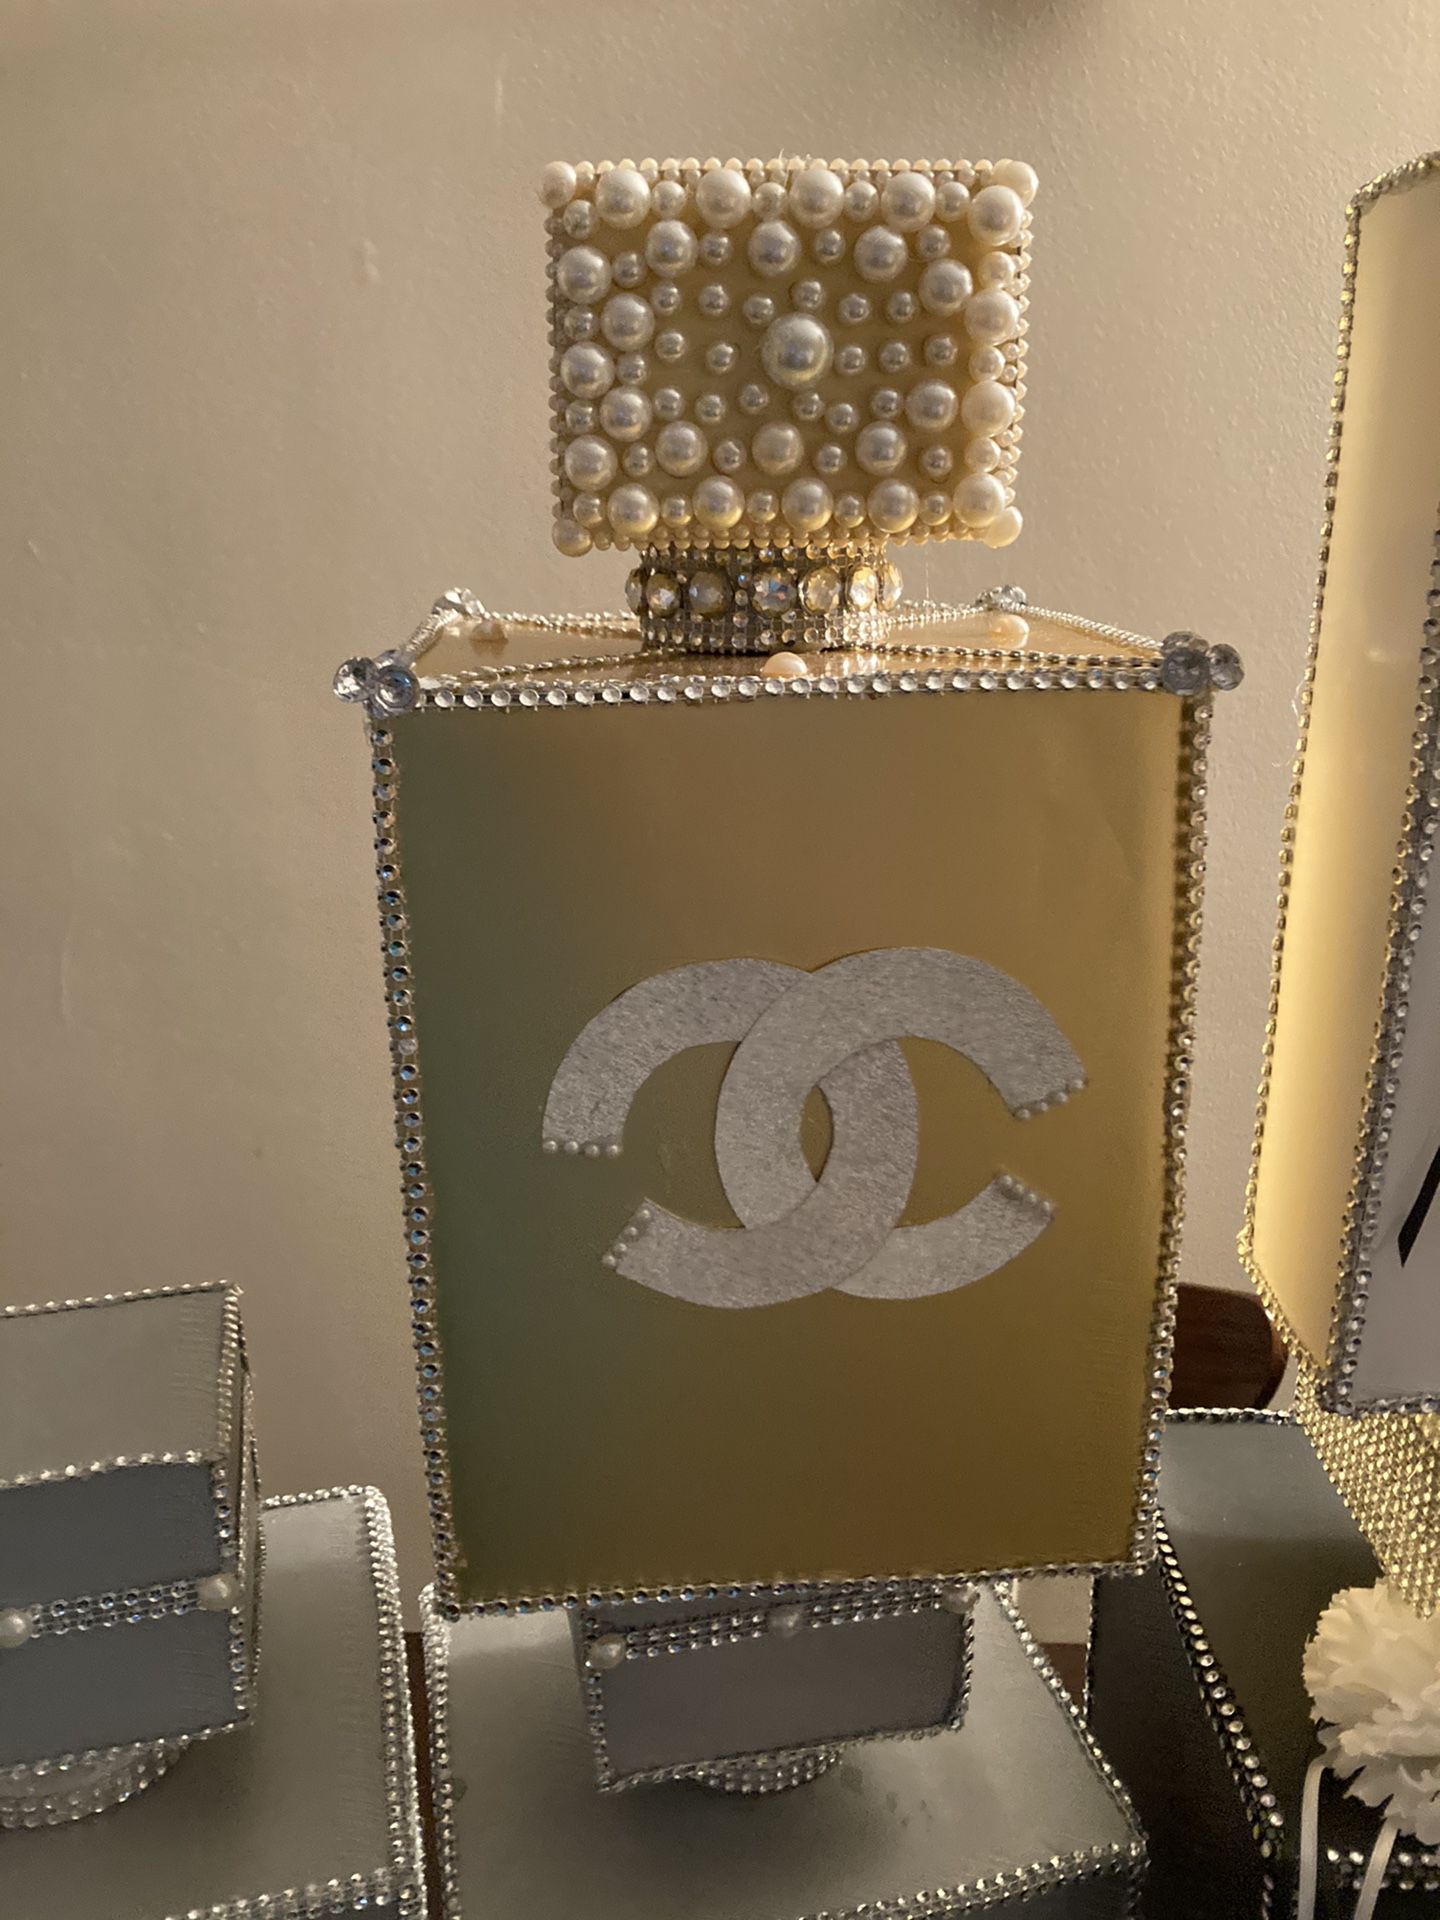 I’m selling my Chanel perfume boxes